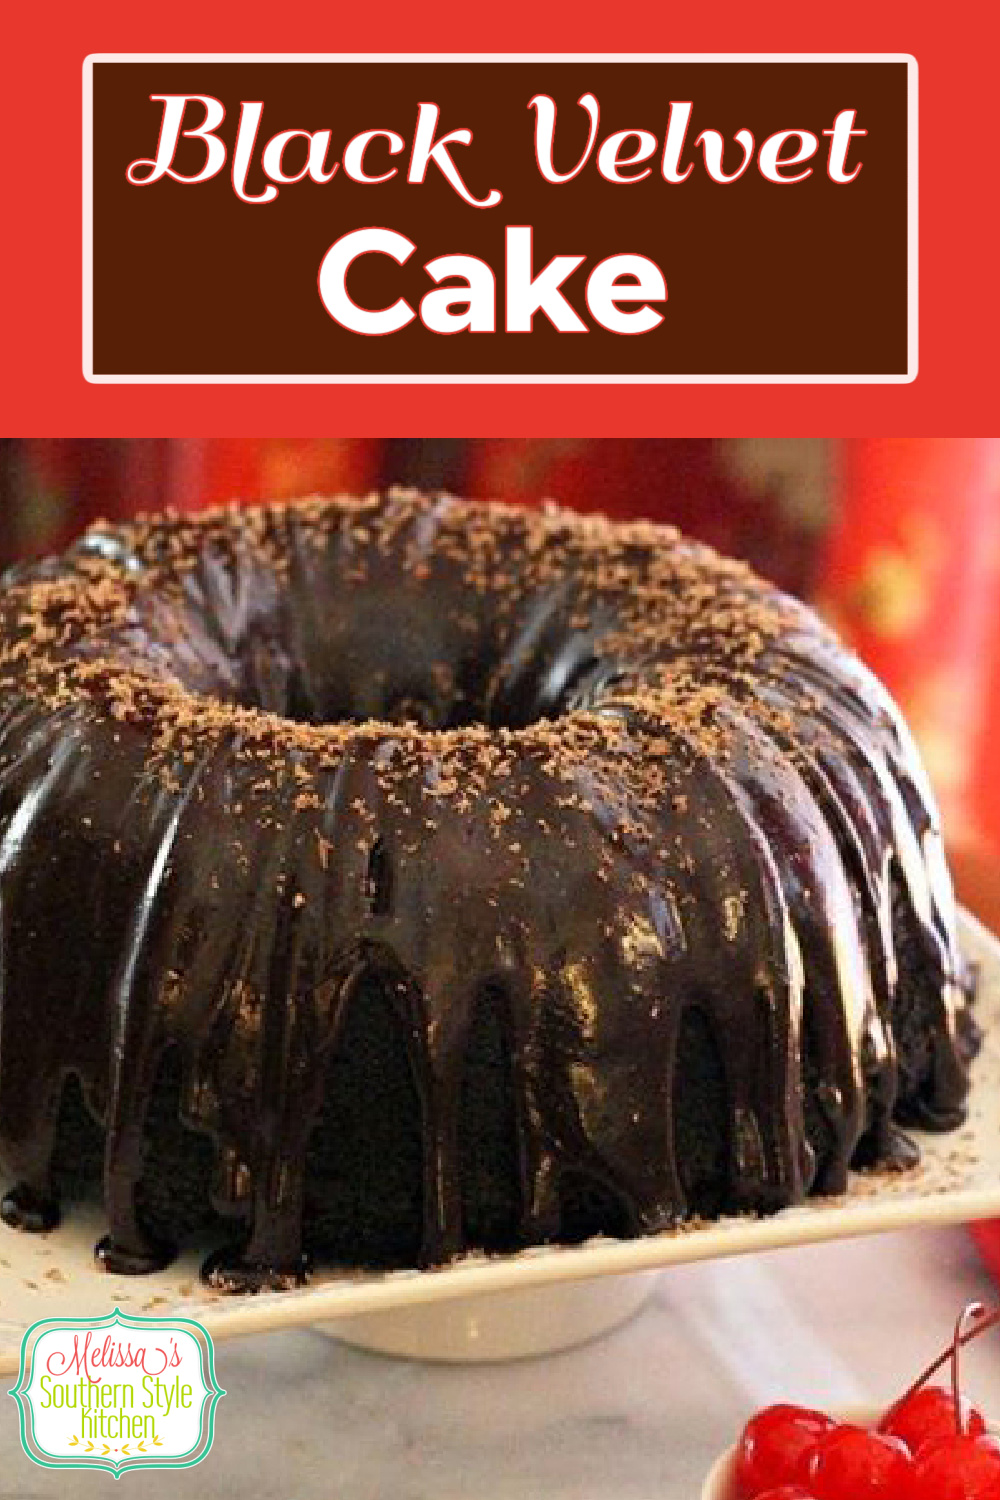 This fudgy Black Velvet Cake is drizzled with a glorious dark chocolate ganache for the crowning touch #blackvelvetcake #redvelvetcake #chocolate #chocolatecake #darkchocolate #chocolatecakes #cakerecipes #cakes #bundtcake #desserts #dessertfoodrecipes #southernrecipes #southerncakes #southernfood #chocolateganache